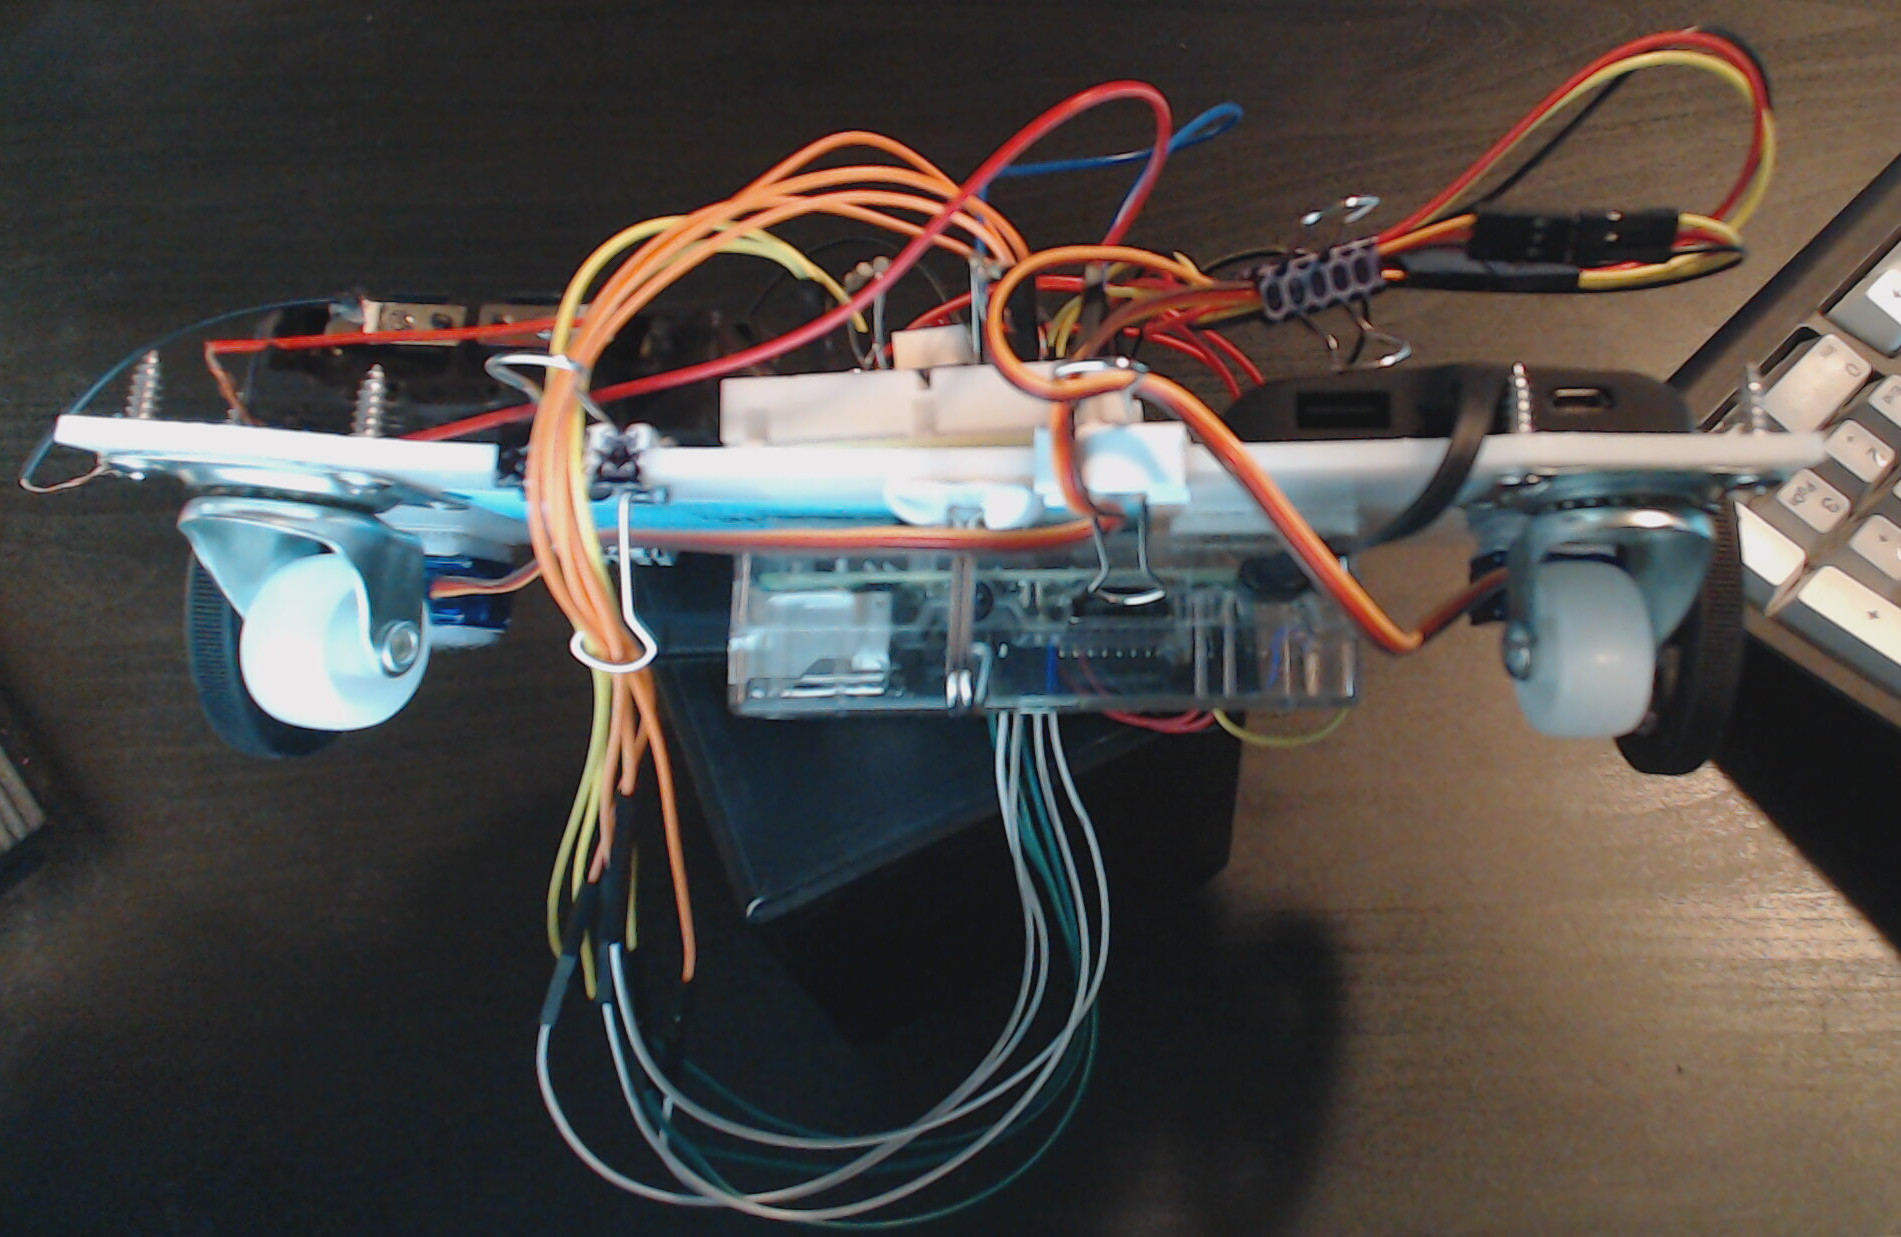 A seven-segment display attached to a Raspberry Pi robot (side/bottom view).